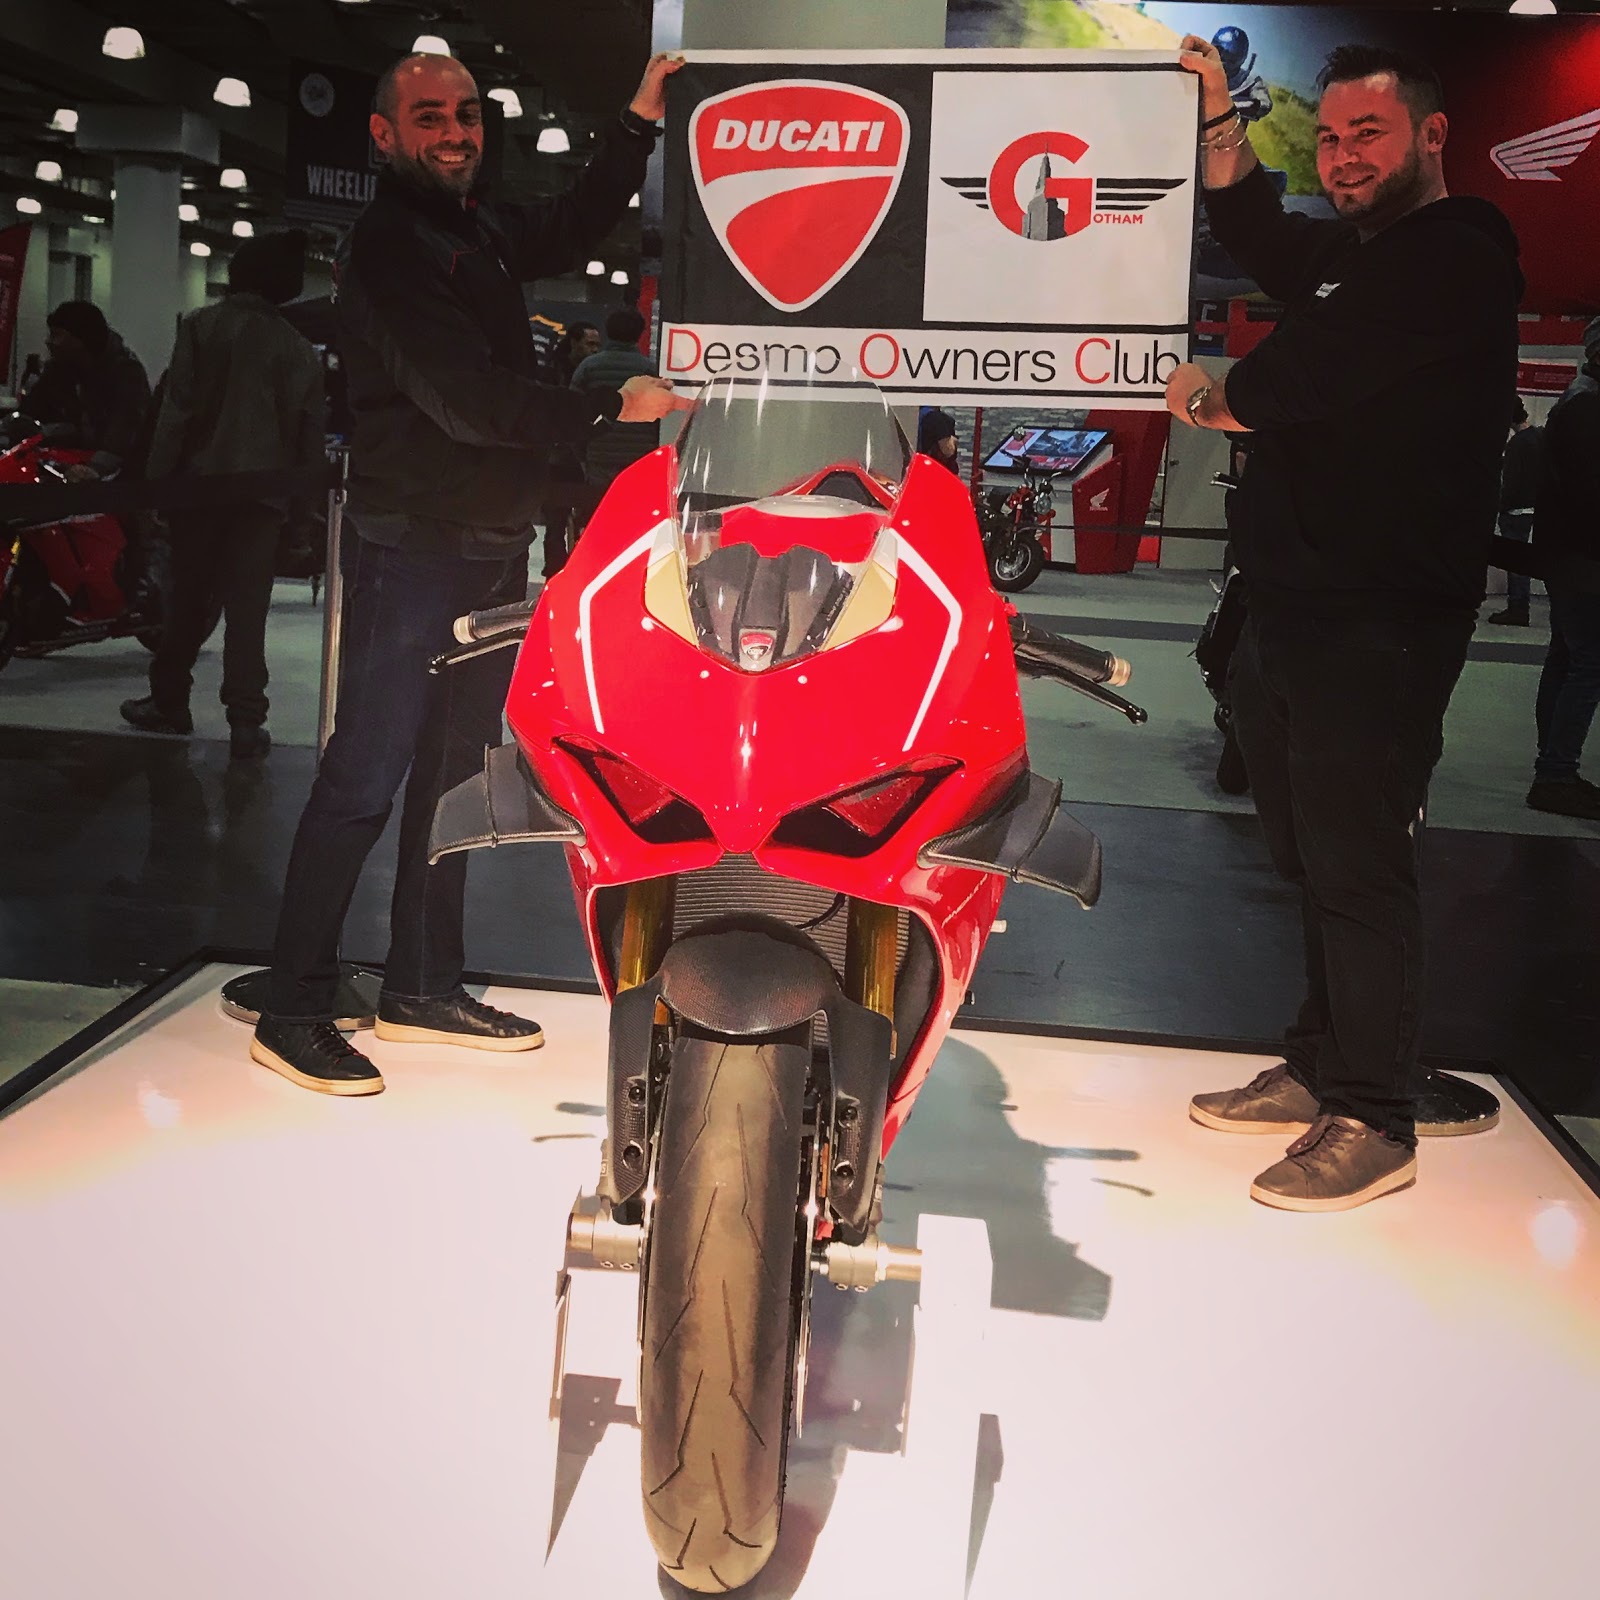 Gotham Ducati V4R Panigale at the International Motorcycle Show in New York